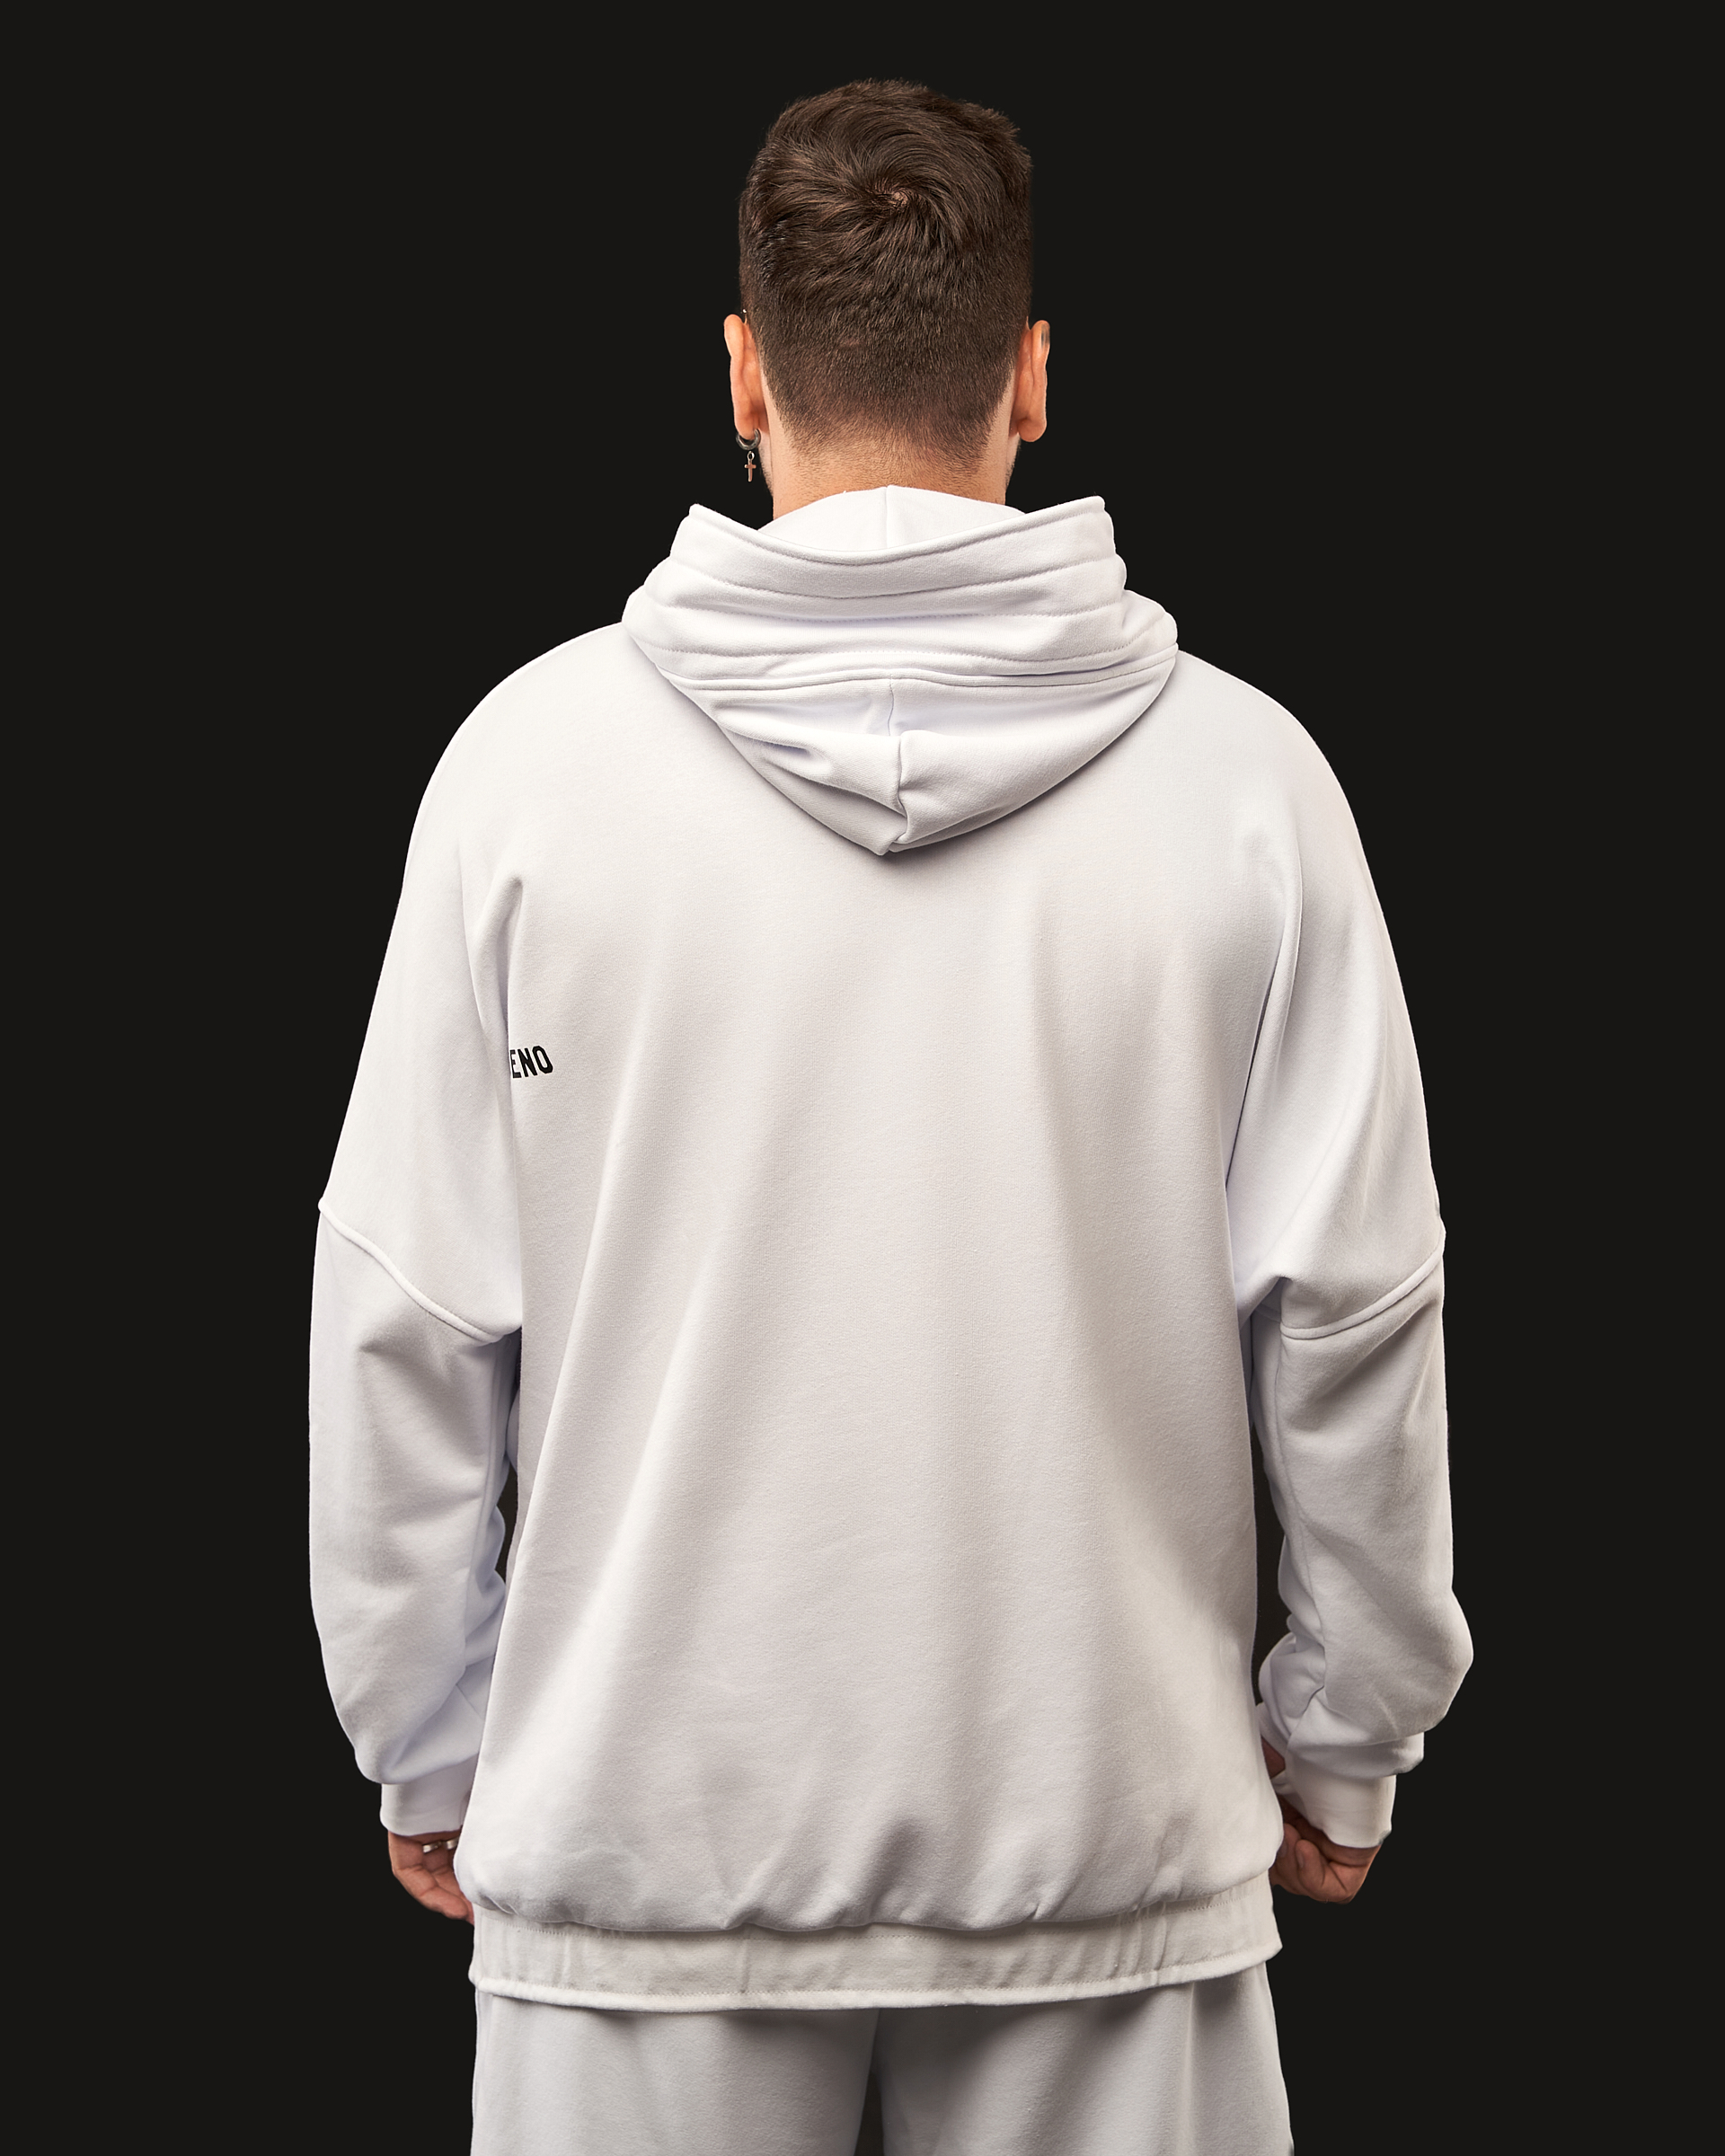 Oversized hoodie (white) Image: https://ohueno-official.com/wp-content/uploads/m01977.jpg